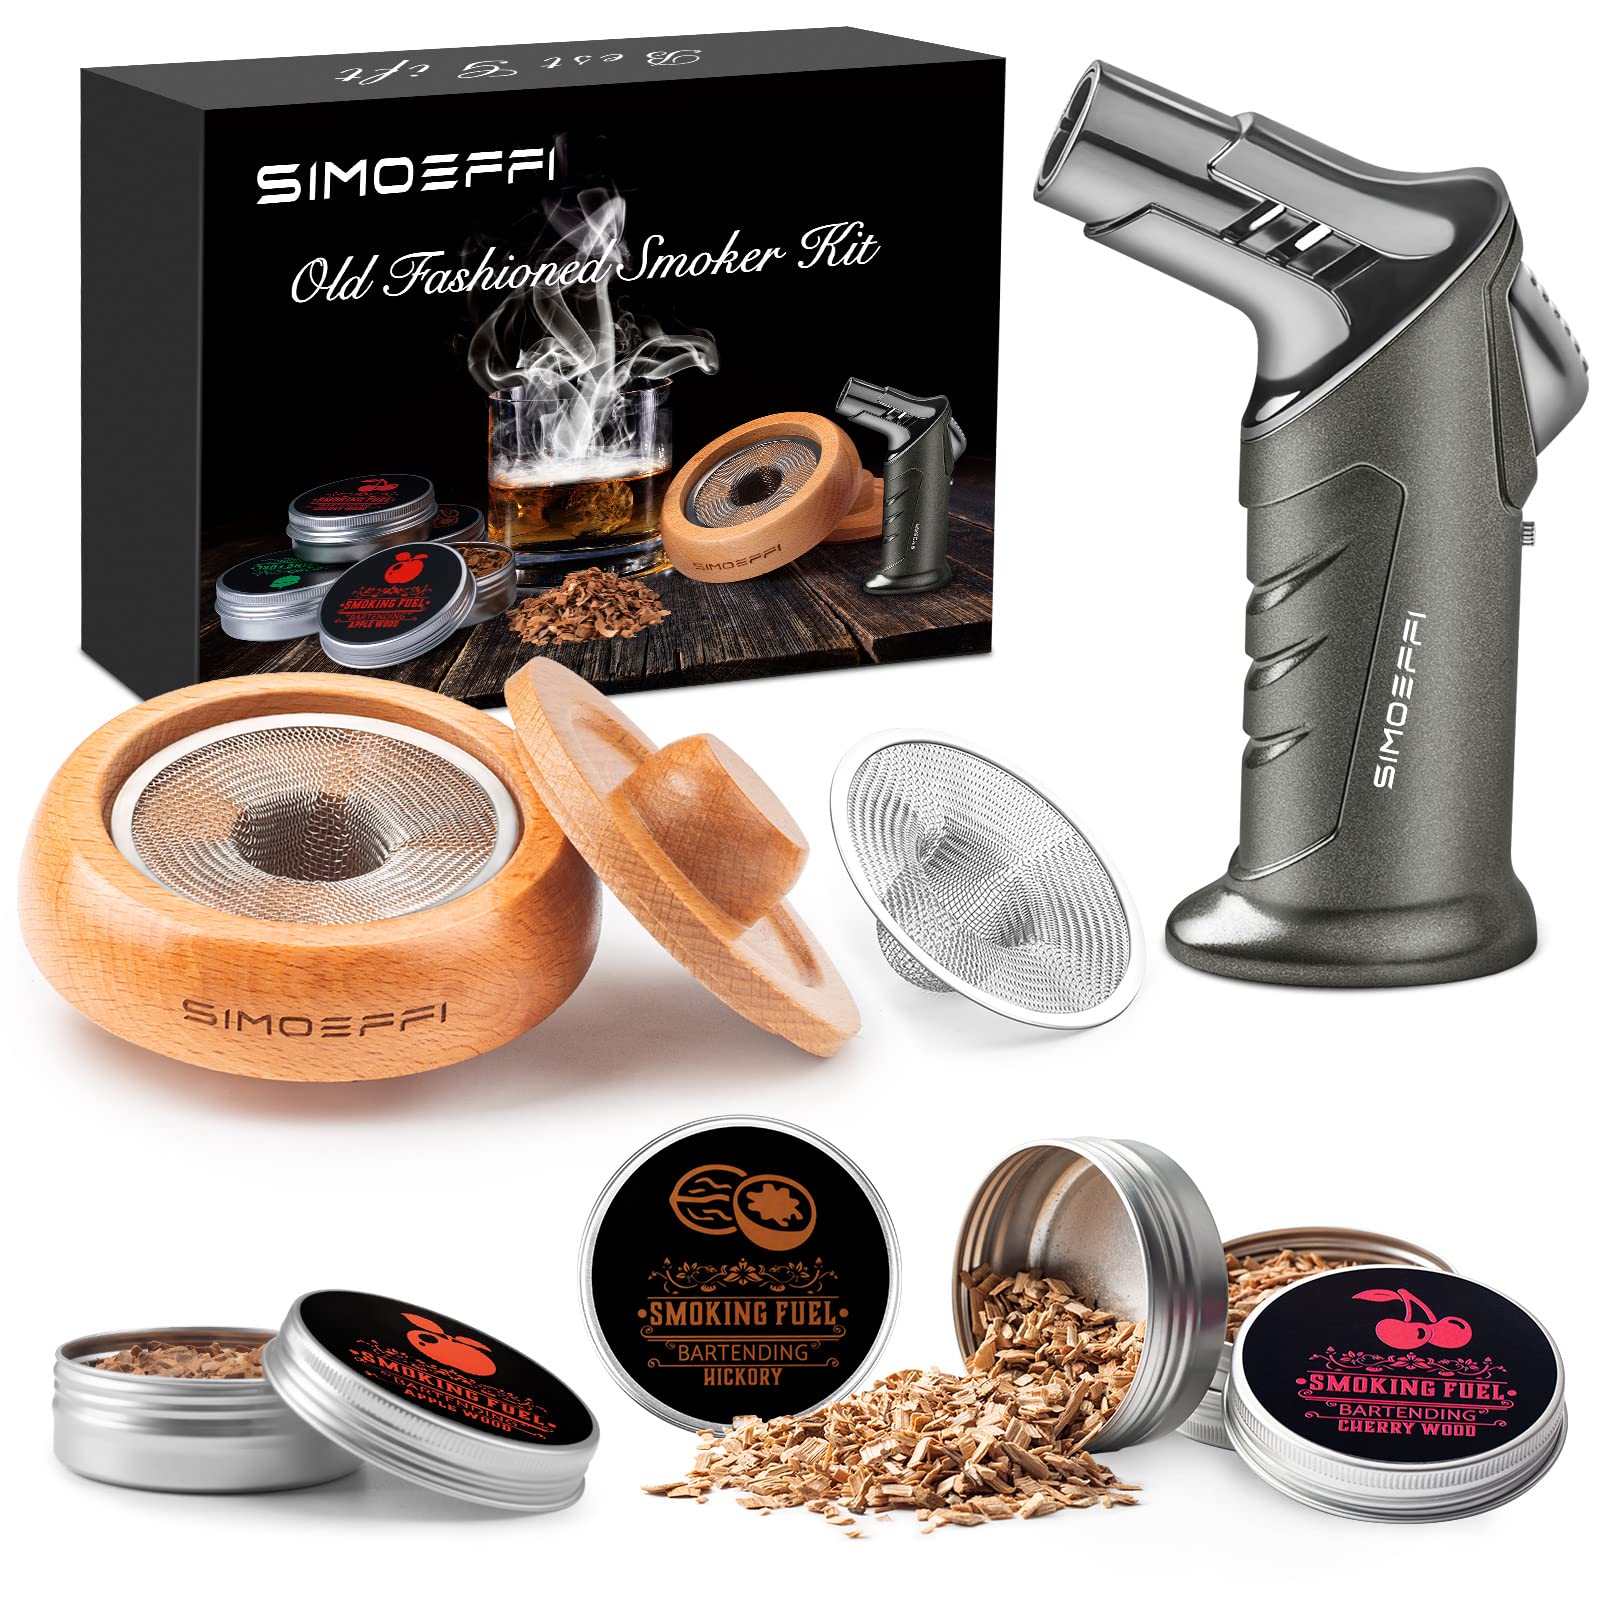 Cocktail Smoker Kit with Torch